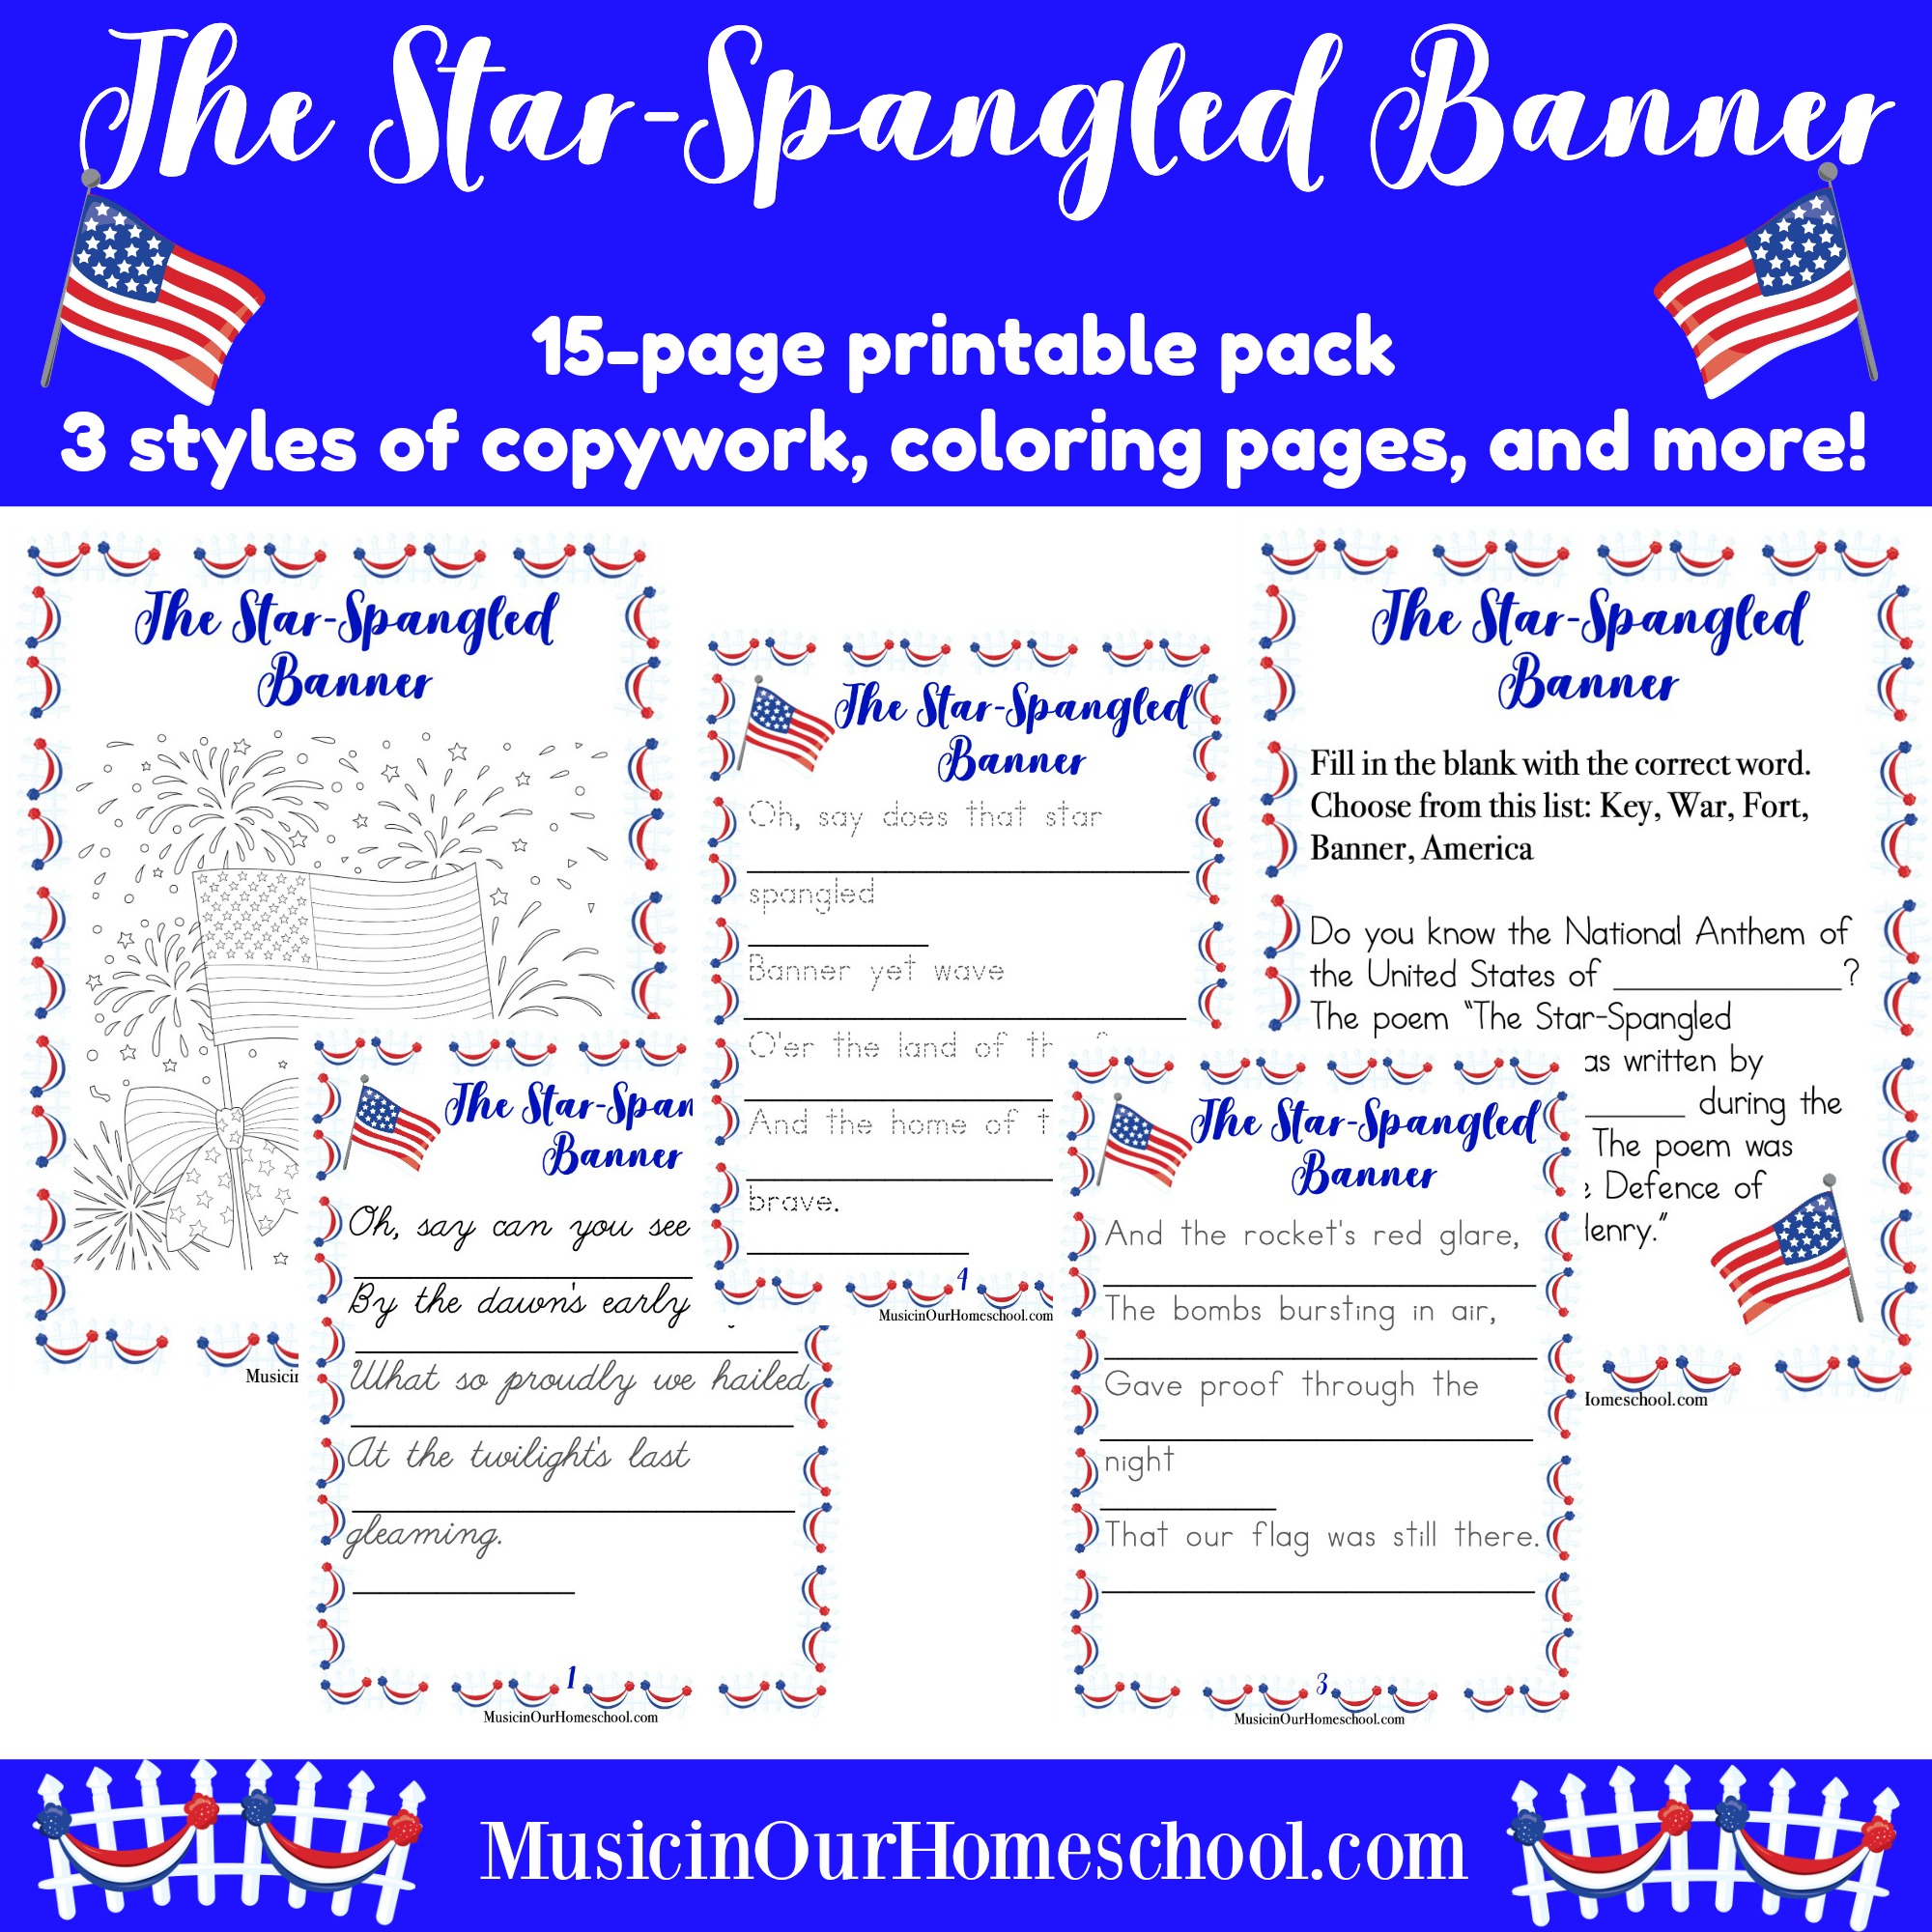 The Star-Spangled Banner printable pack contains 15 pages of copywork of verse one of America's National Anthem (3 styles: regular, dotted, and cursive), coloring pages, and a fill-in-the-blank page. #musicinourhomeschool #starspangledbanner #musiclessonsforkids #patrioticmusic #copywork